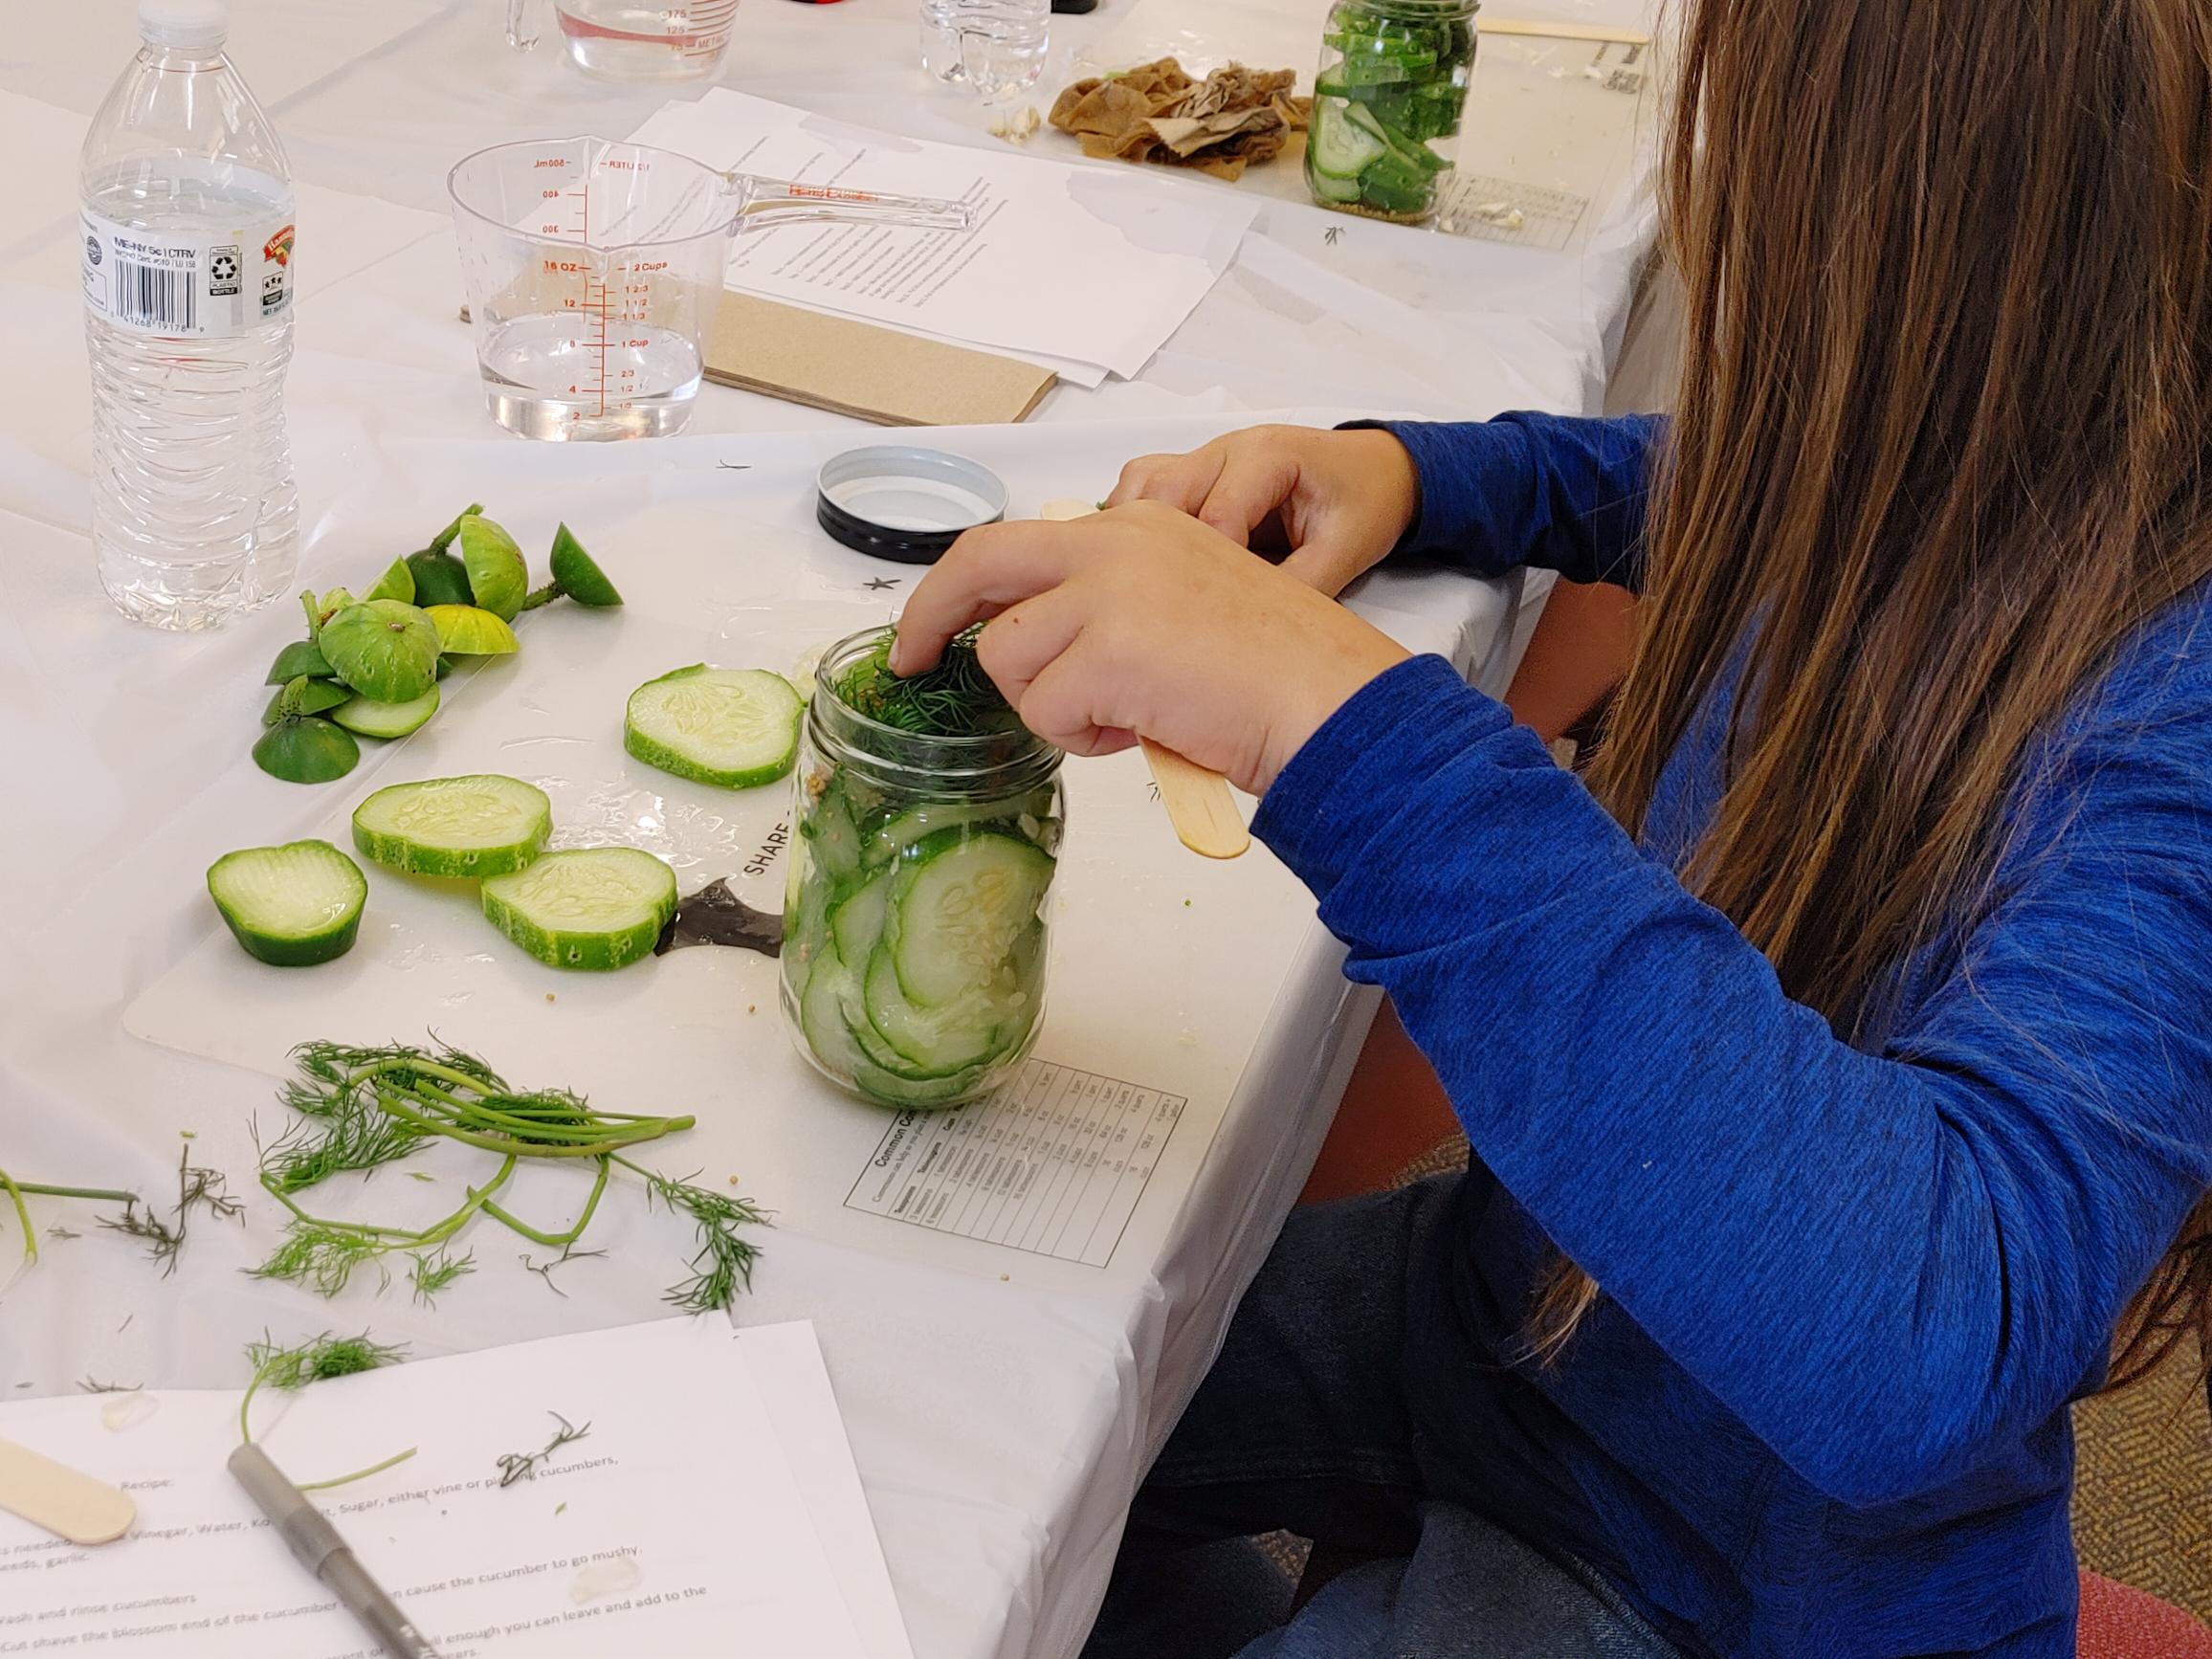 "Making Pickles" The Cucumber to Pickle Project 2nd Workshop at the Hillsborough County Complex in Goffstown, NH